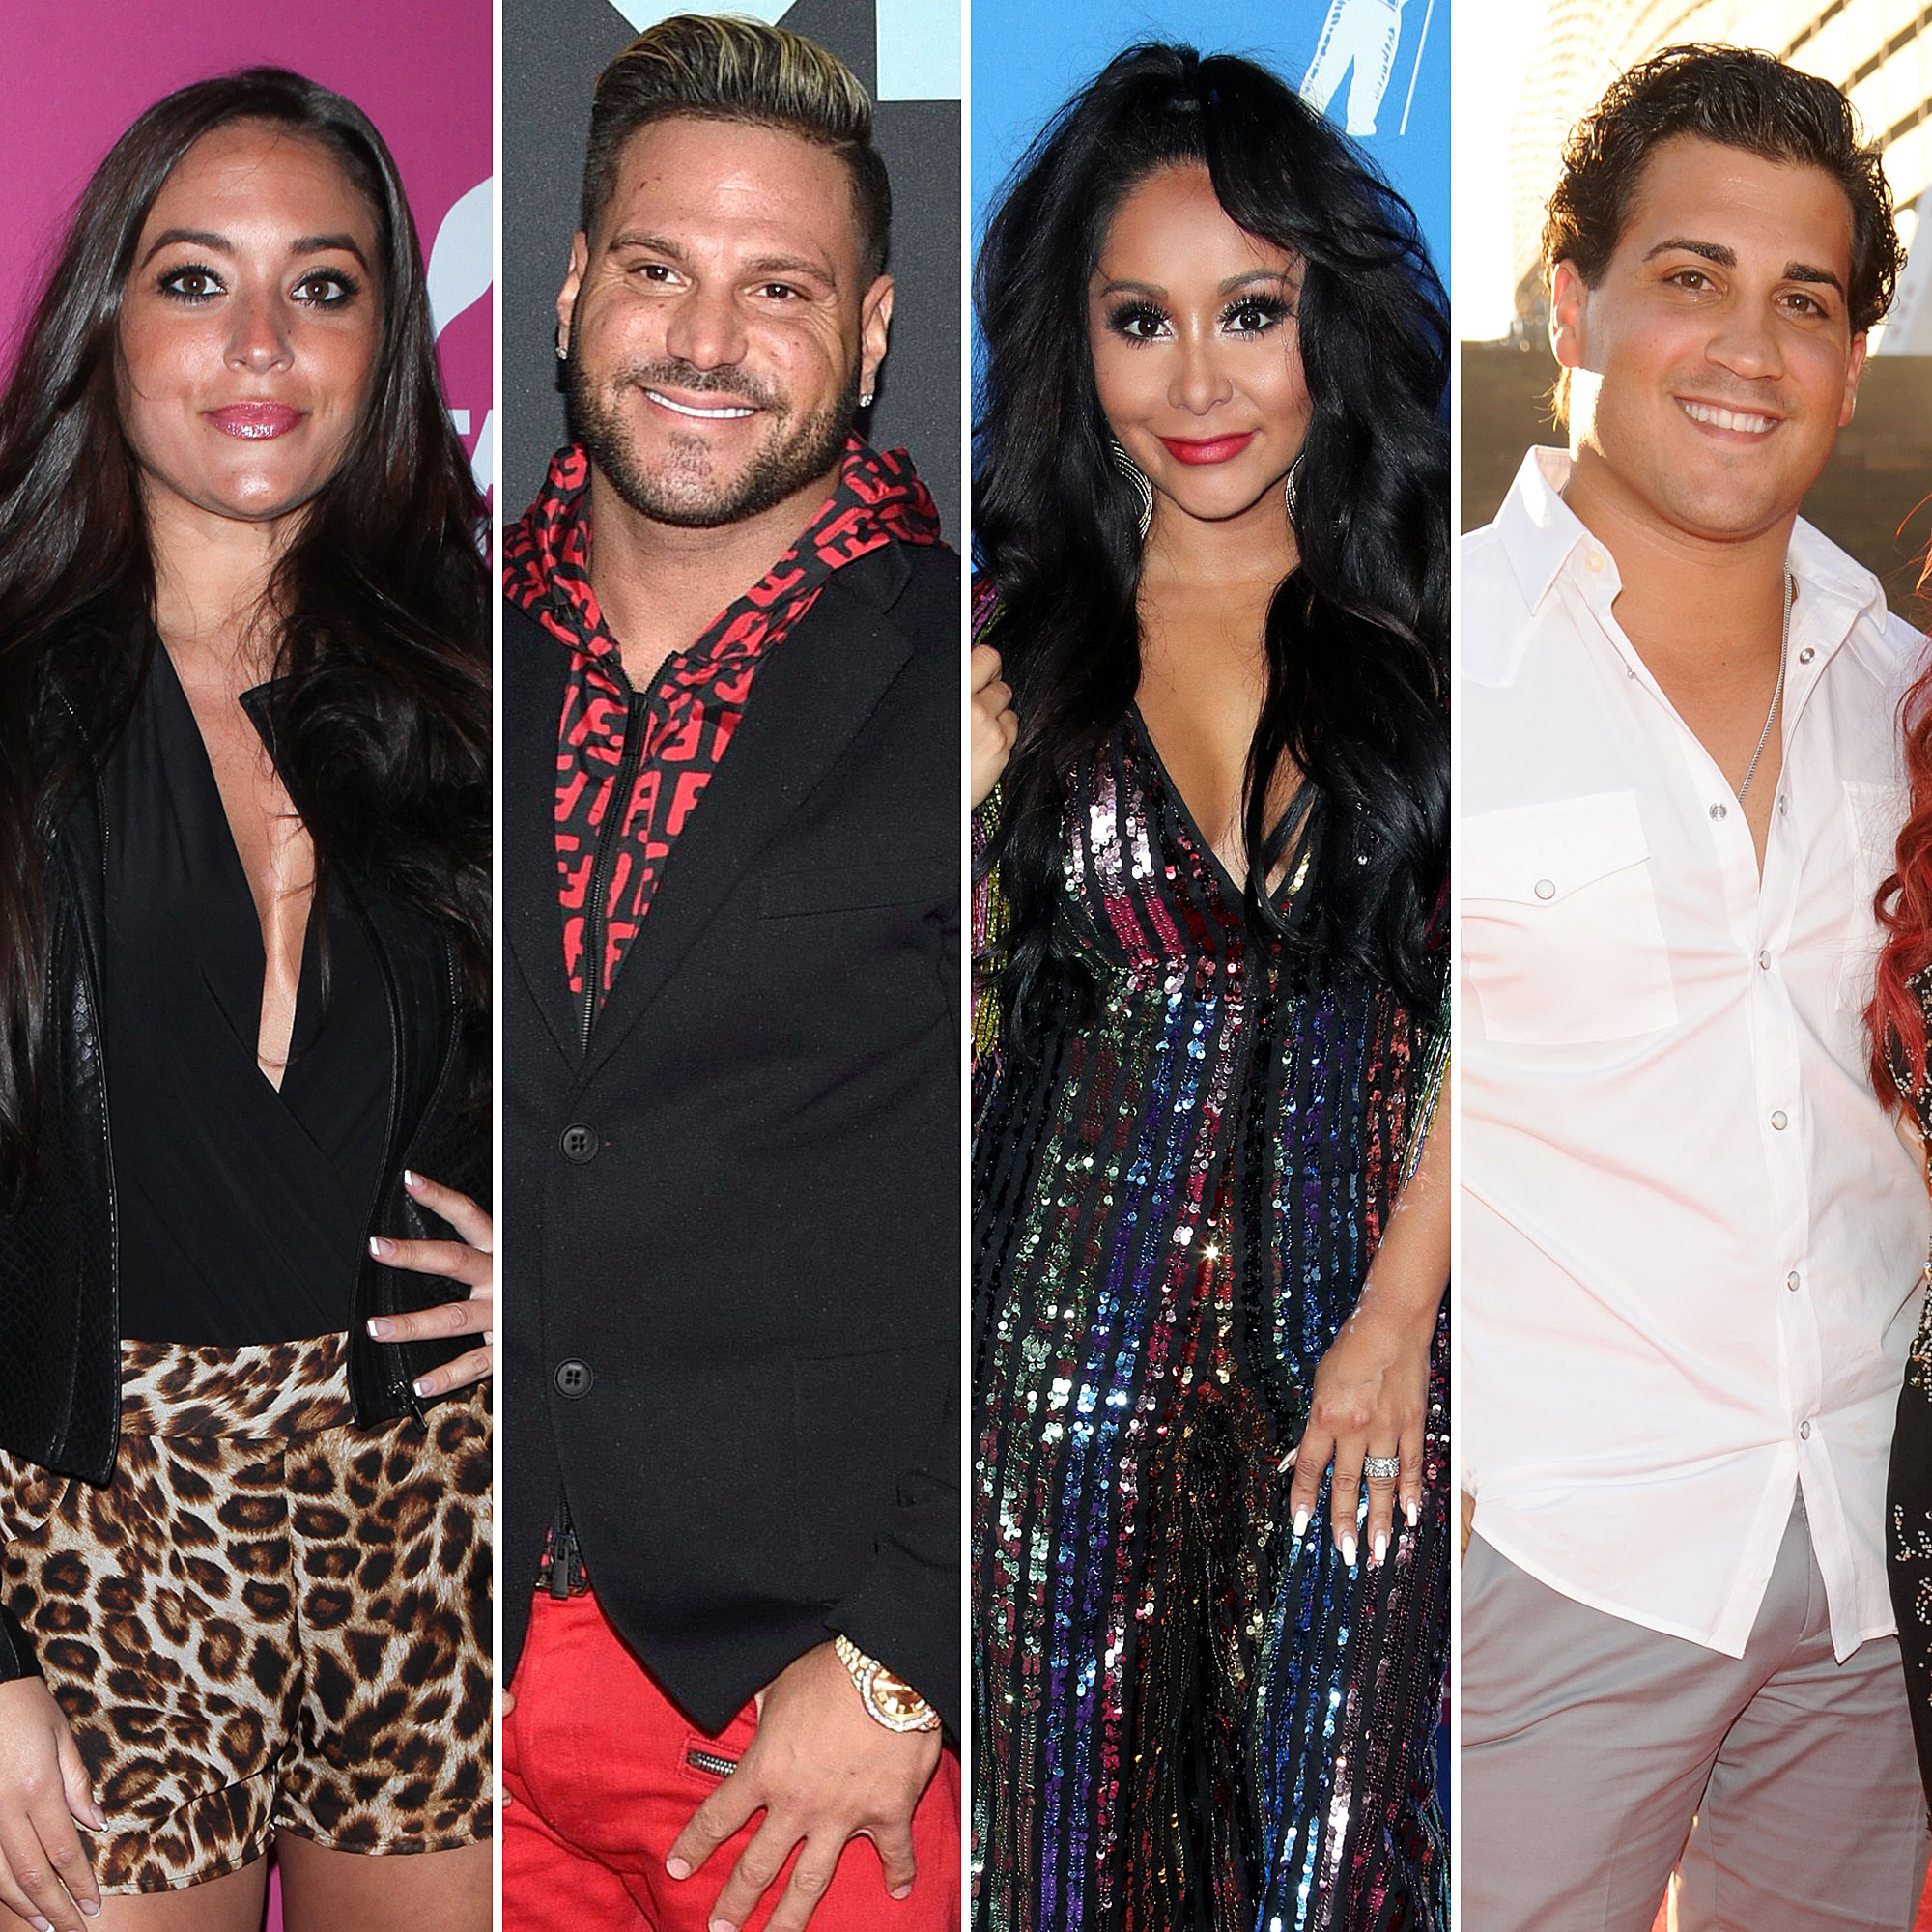 Jersey Shore' Cast - Then and Now!